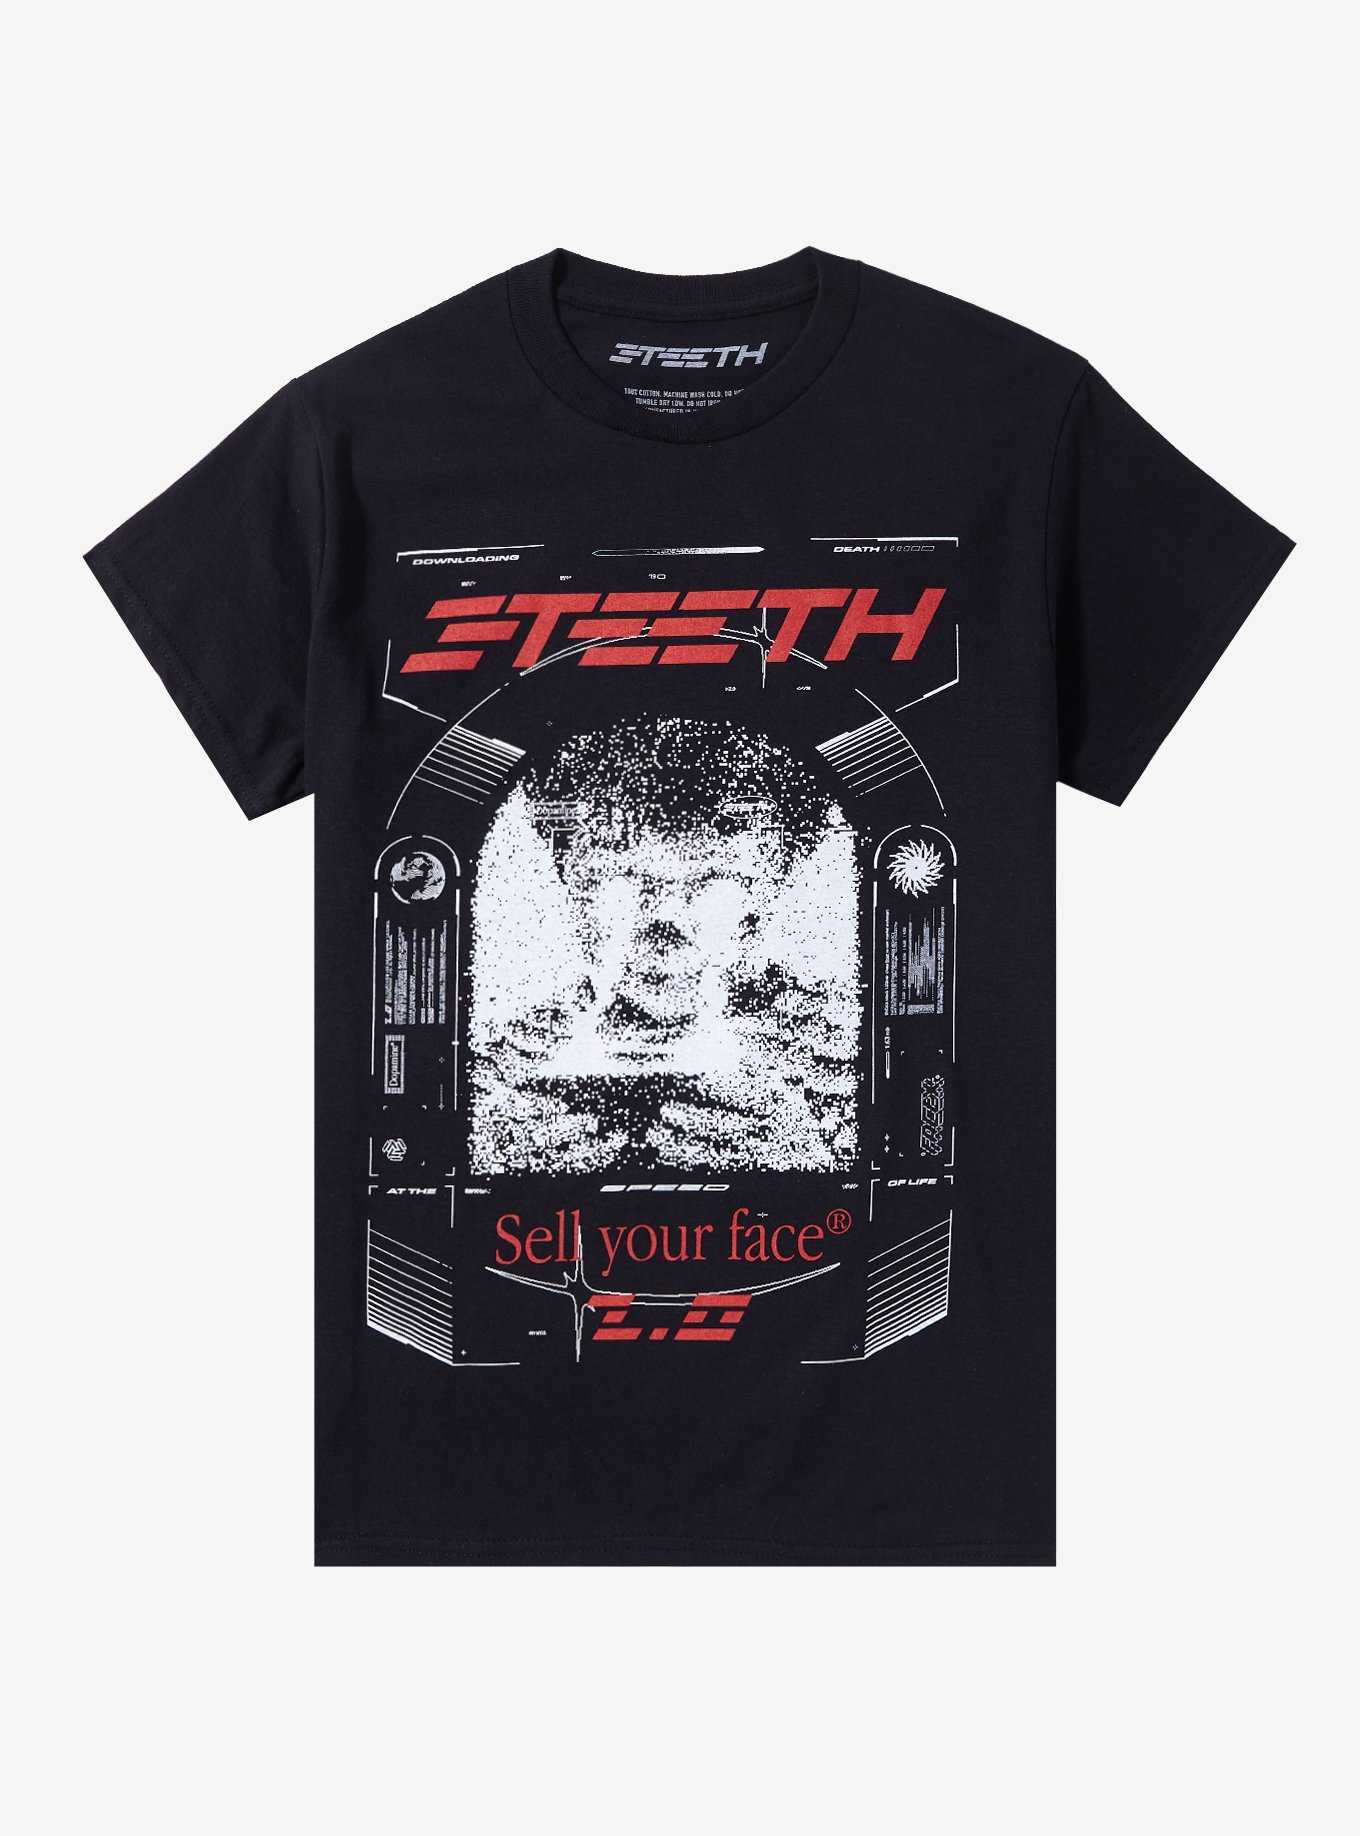 3Teeth Sell Your Face 2.0 Boyfriend Fit T-Shirt, , hi-res